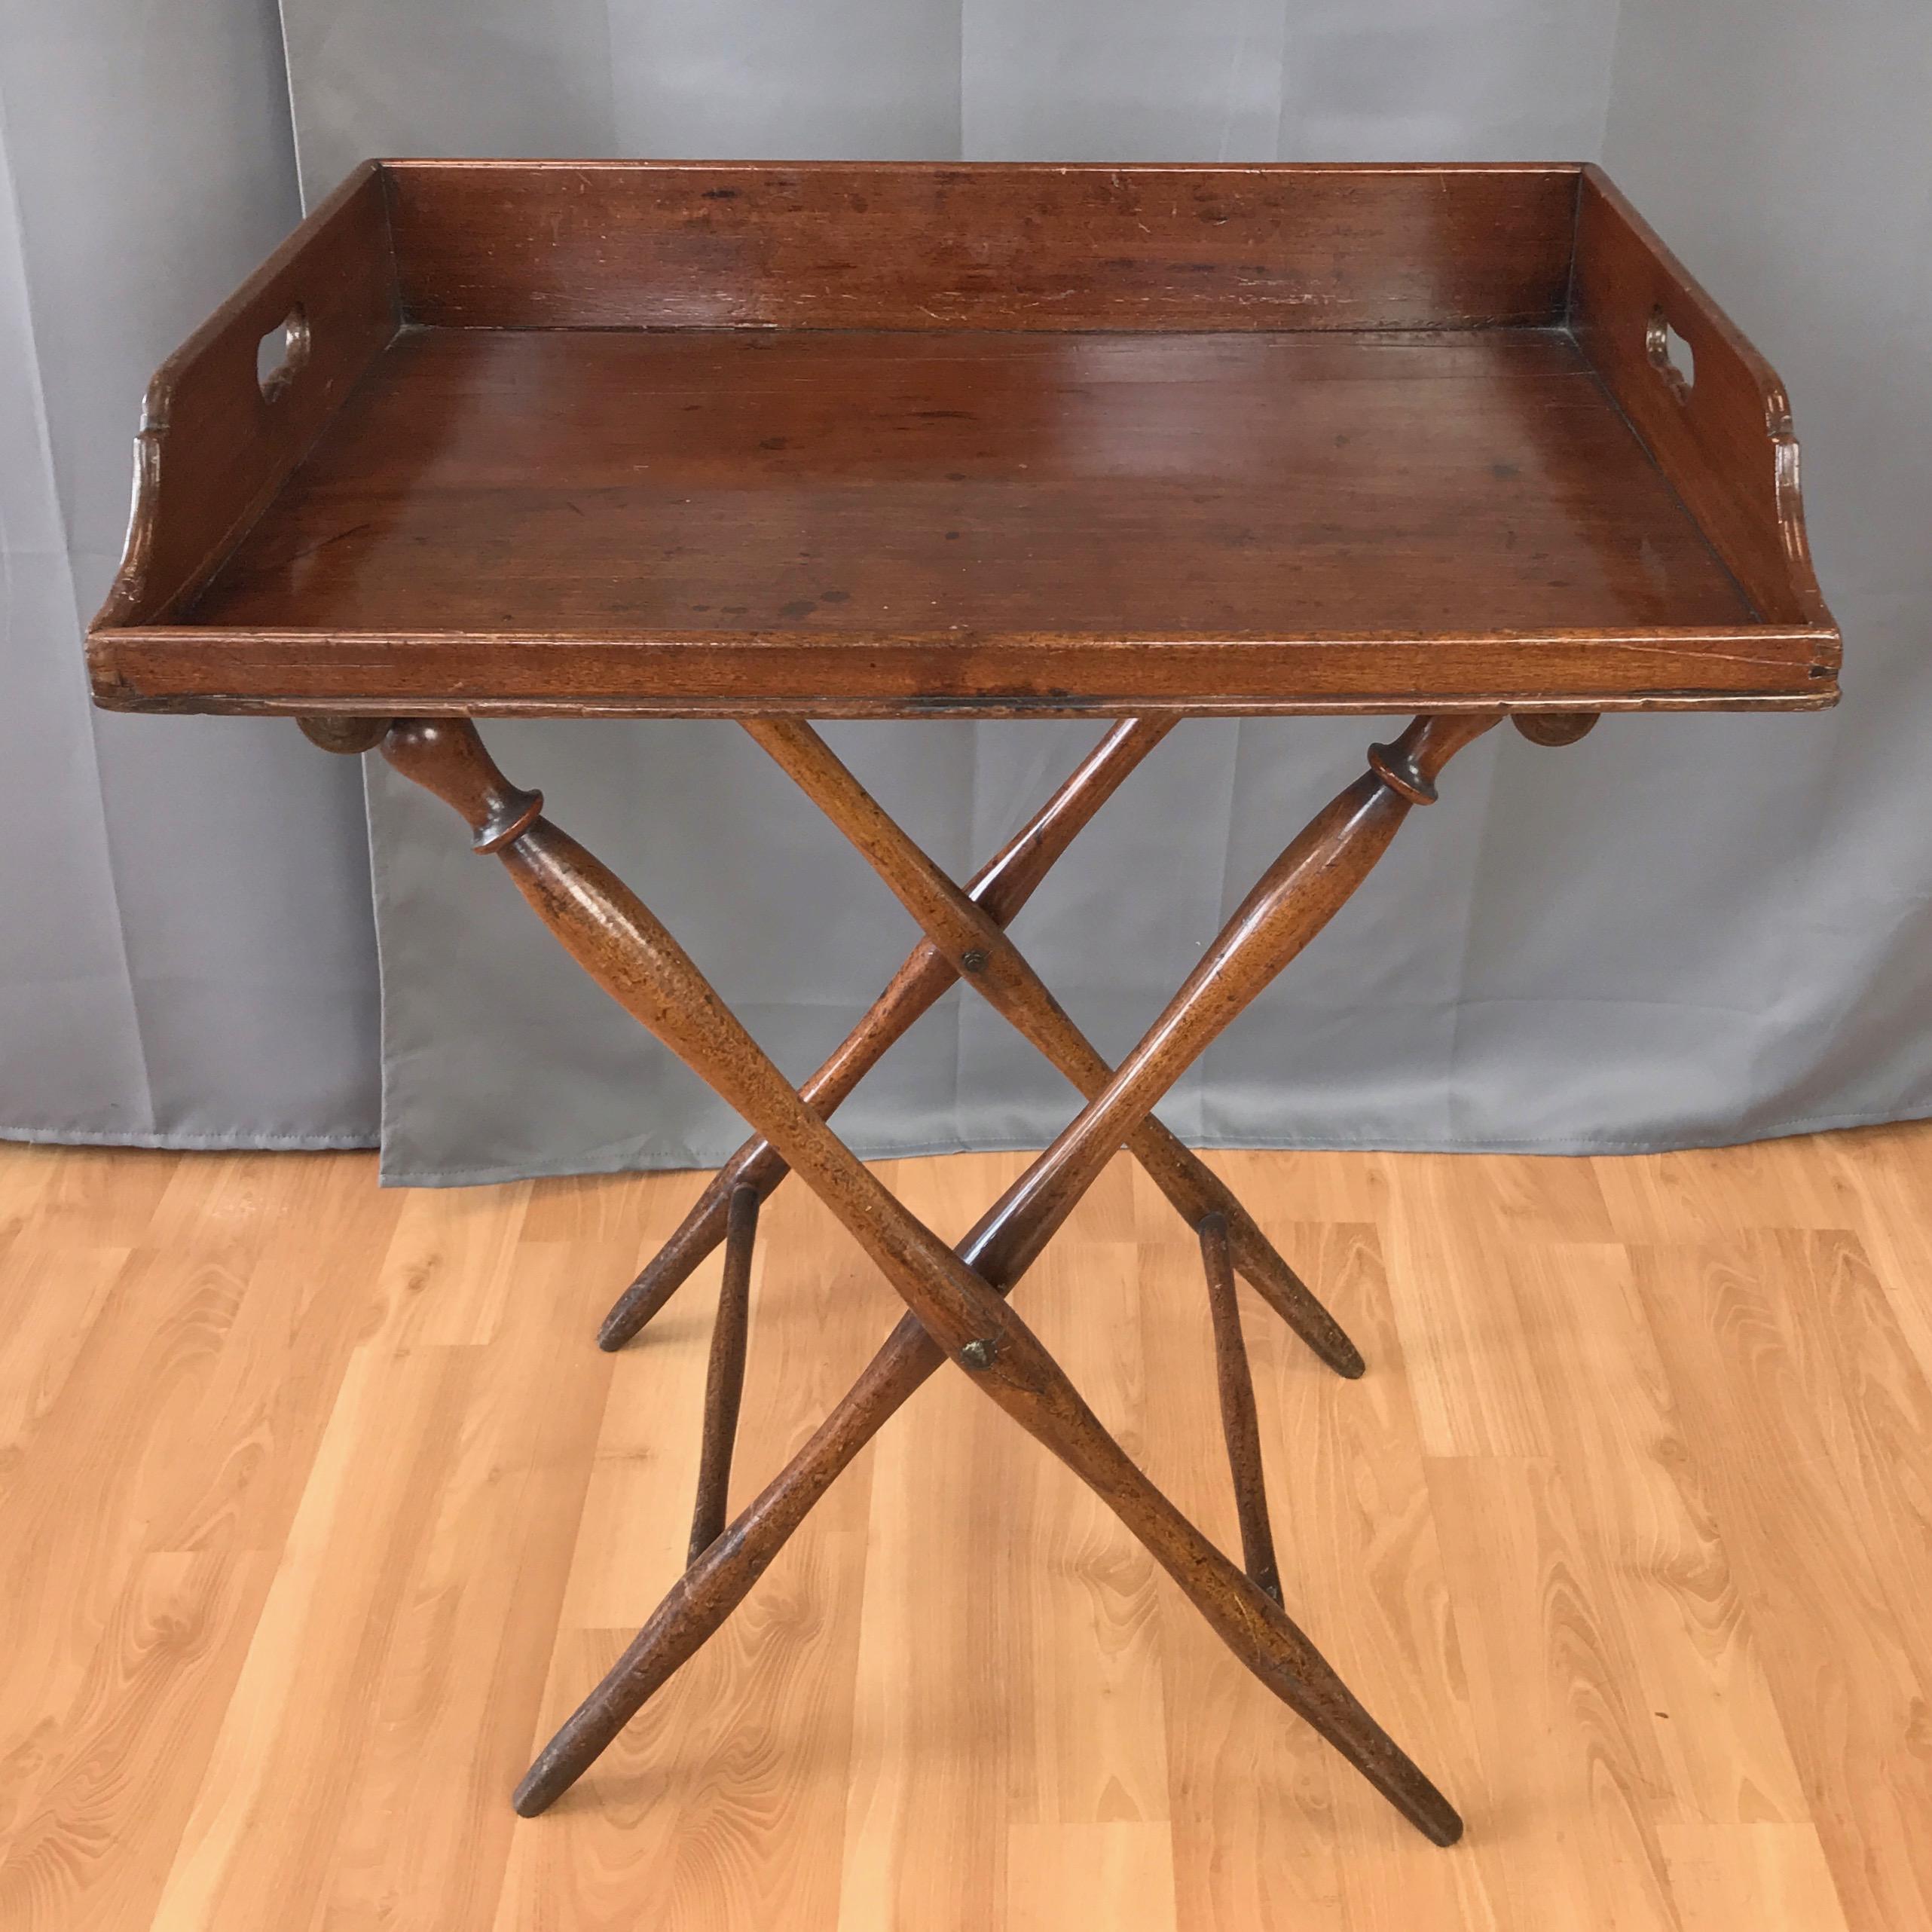 An antique mahogany English butler’s tray table with folding base, circa mid-Victorian period.

Removable top has traditional handle and side detailing with exposed dovetail joinery. Sits on a Campaign style folding base with gracefully turned